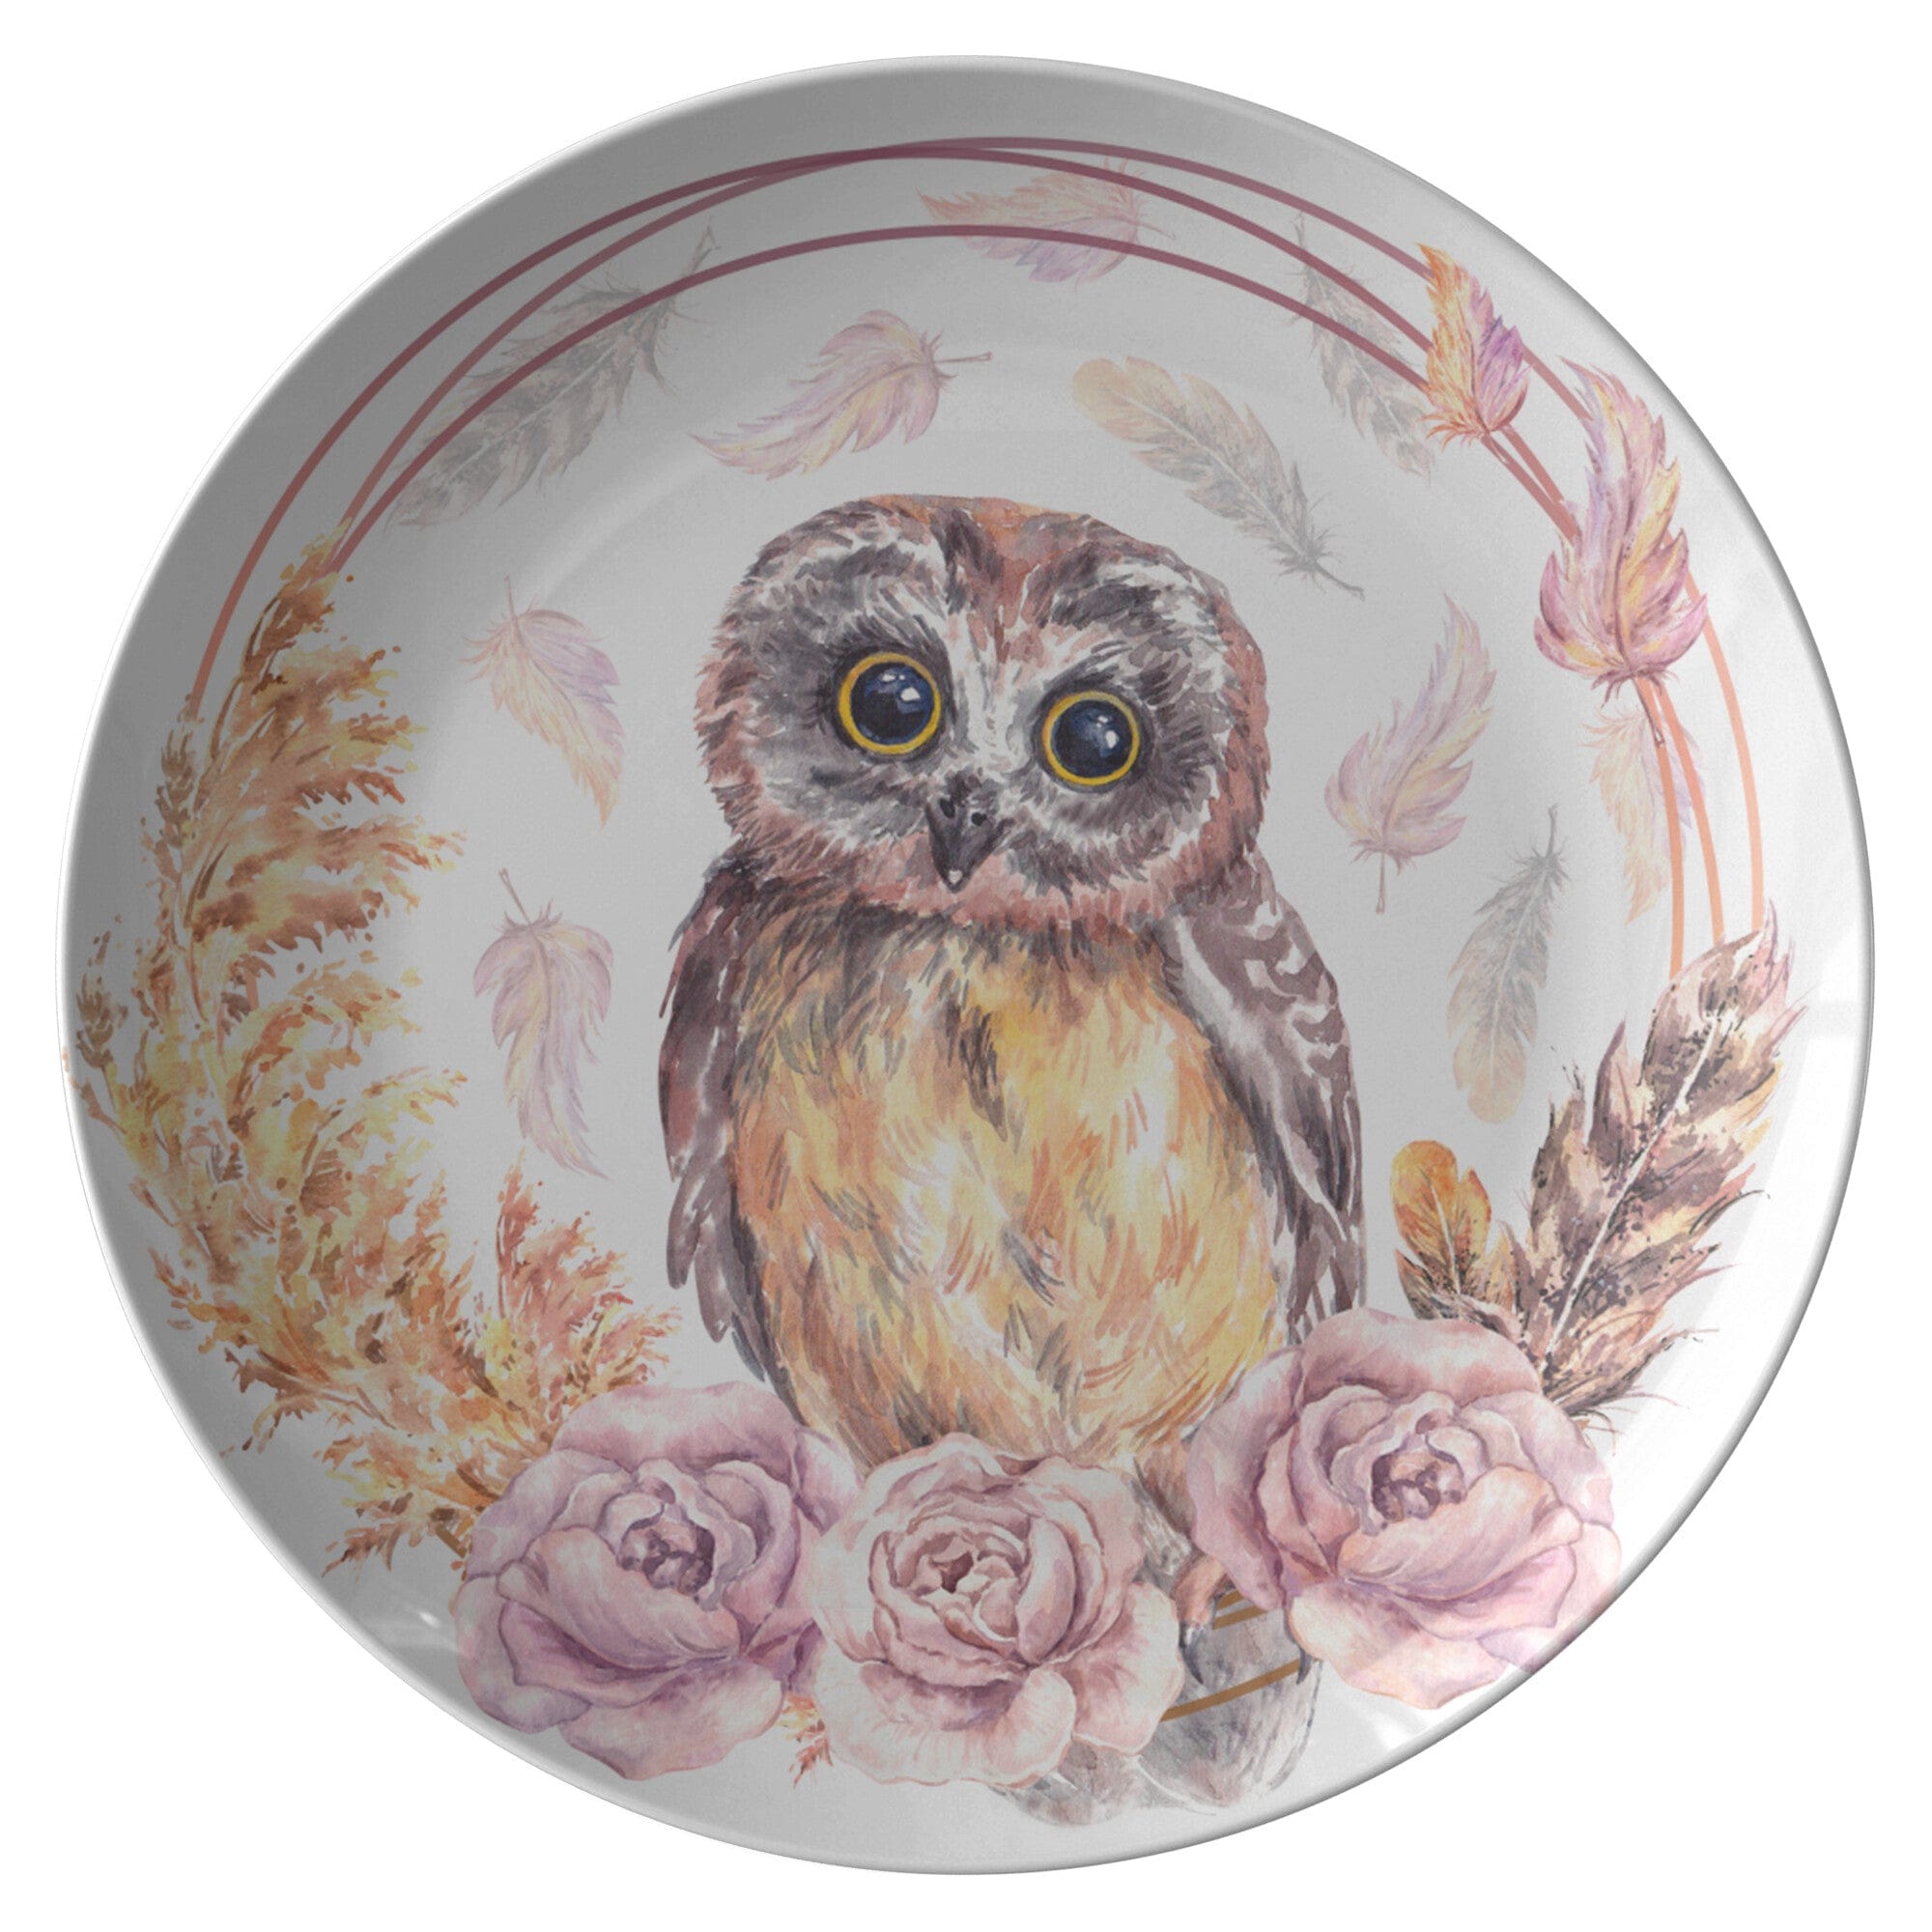 Kate McEnroe New York Dinner Plate in Boho Florals and Owl Plates